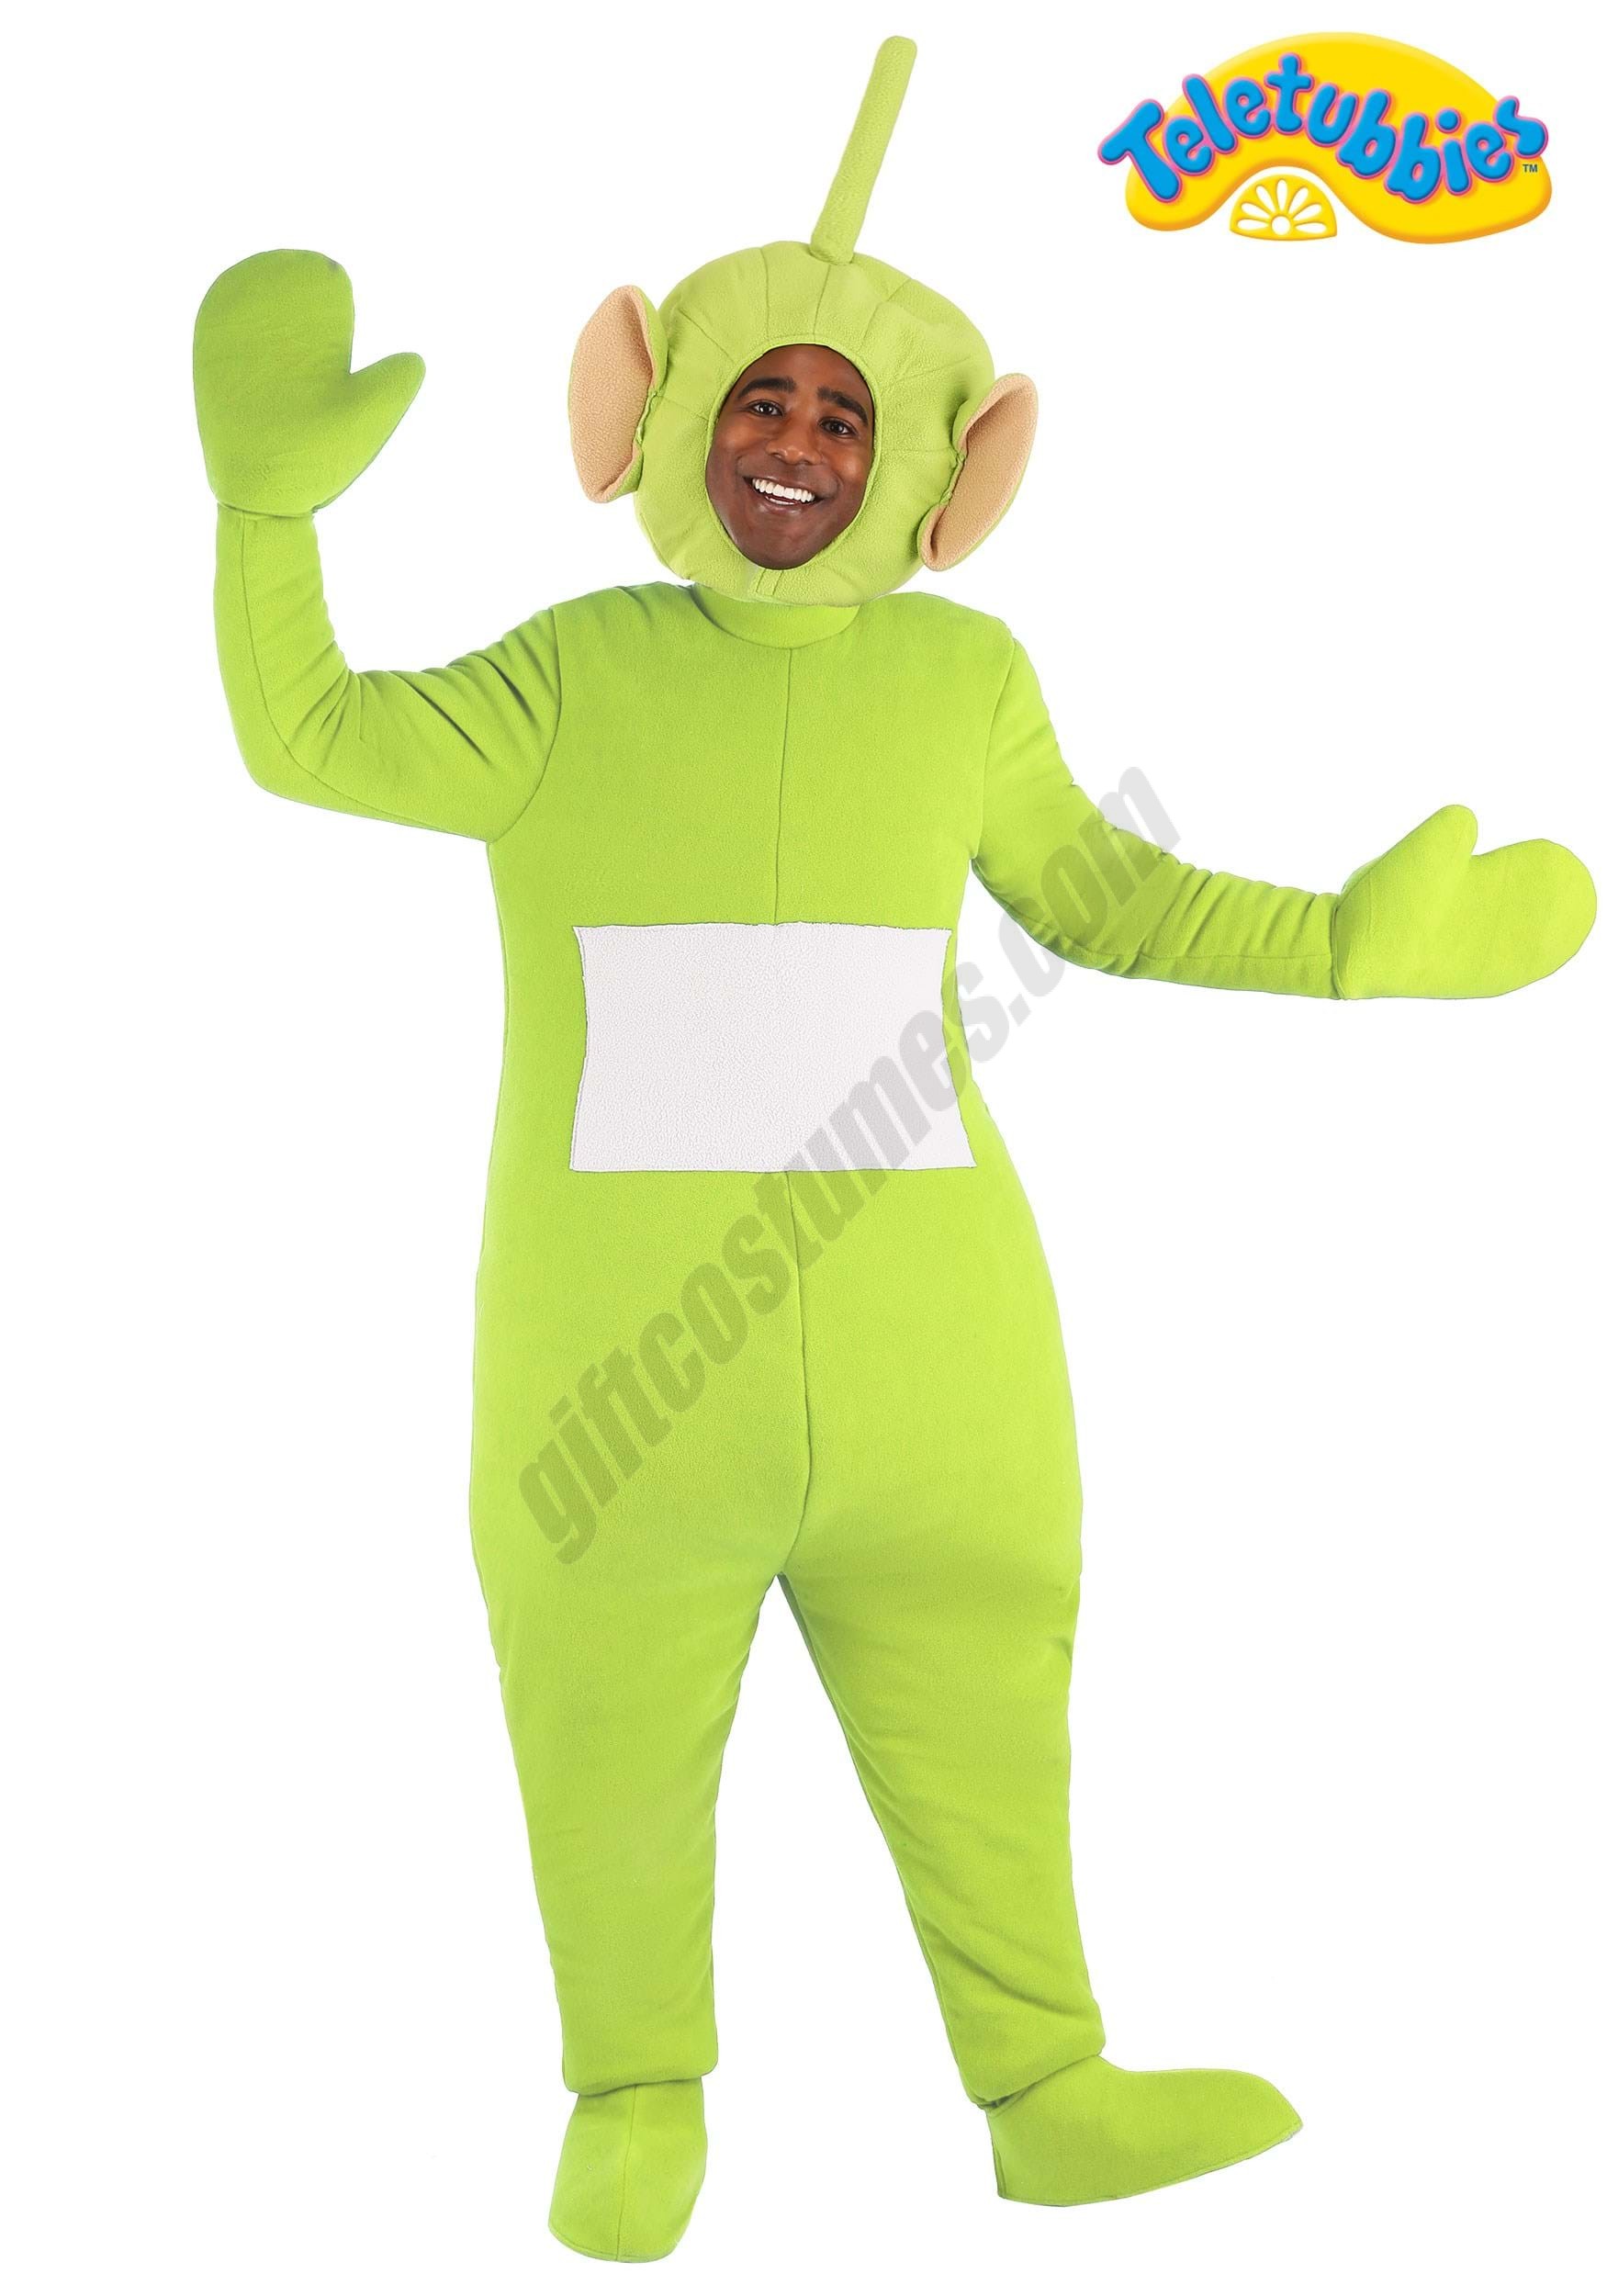 Teletubbies Dipsy Costume for Adults Promotions - Teletubbies Dipsy Costume for Adults Promotions